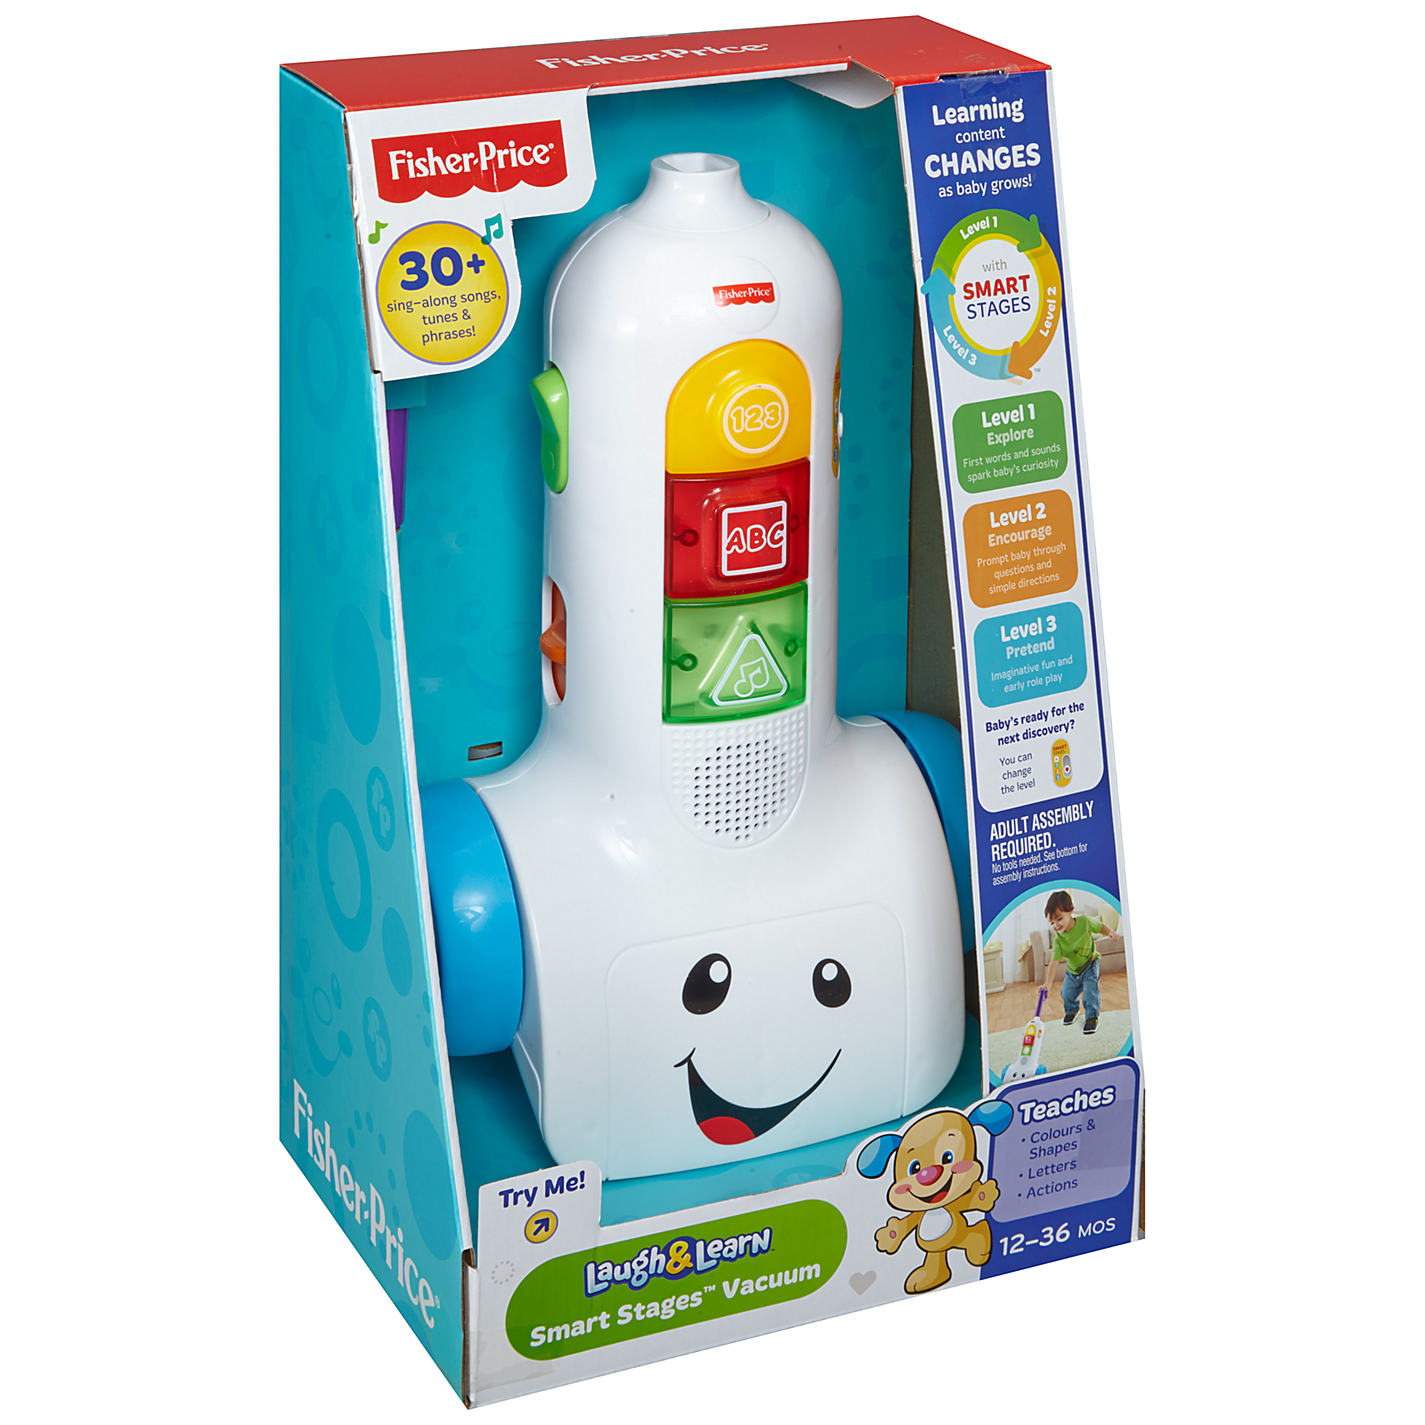 FisherPrice Smart Stages Toys Grow Along with Your Child